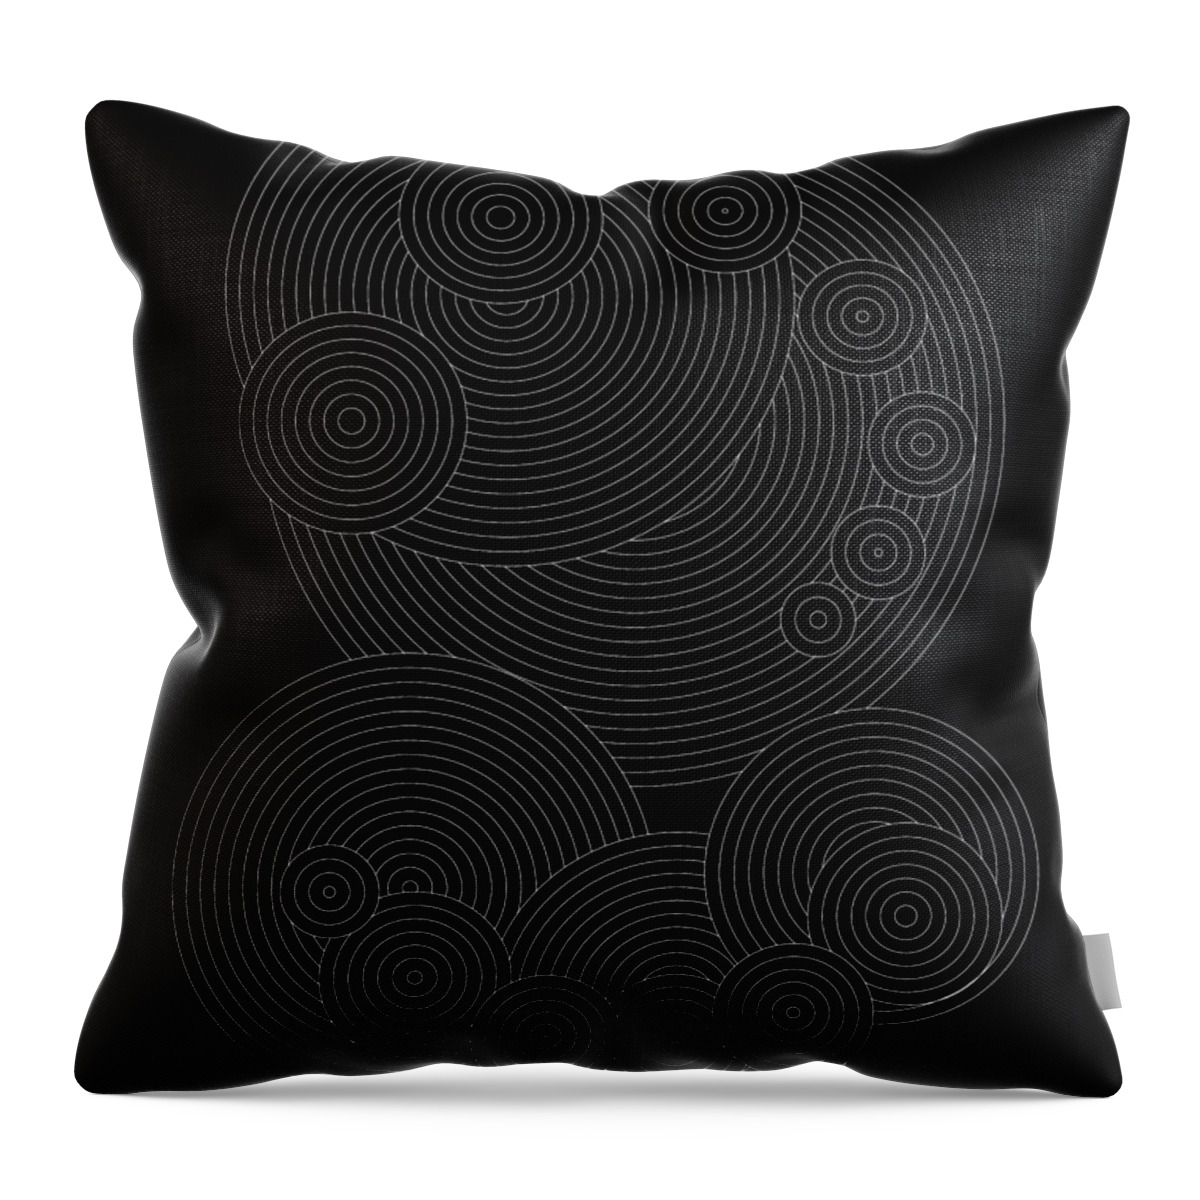 Relief Throw Pillow featuring the digital art Circular Sunday Inverse by DB Artist